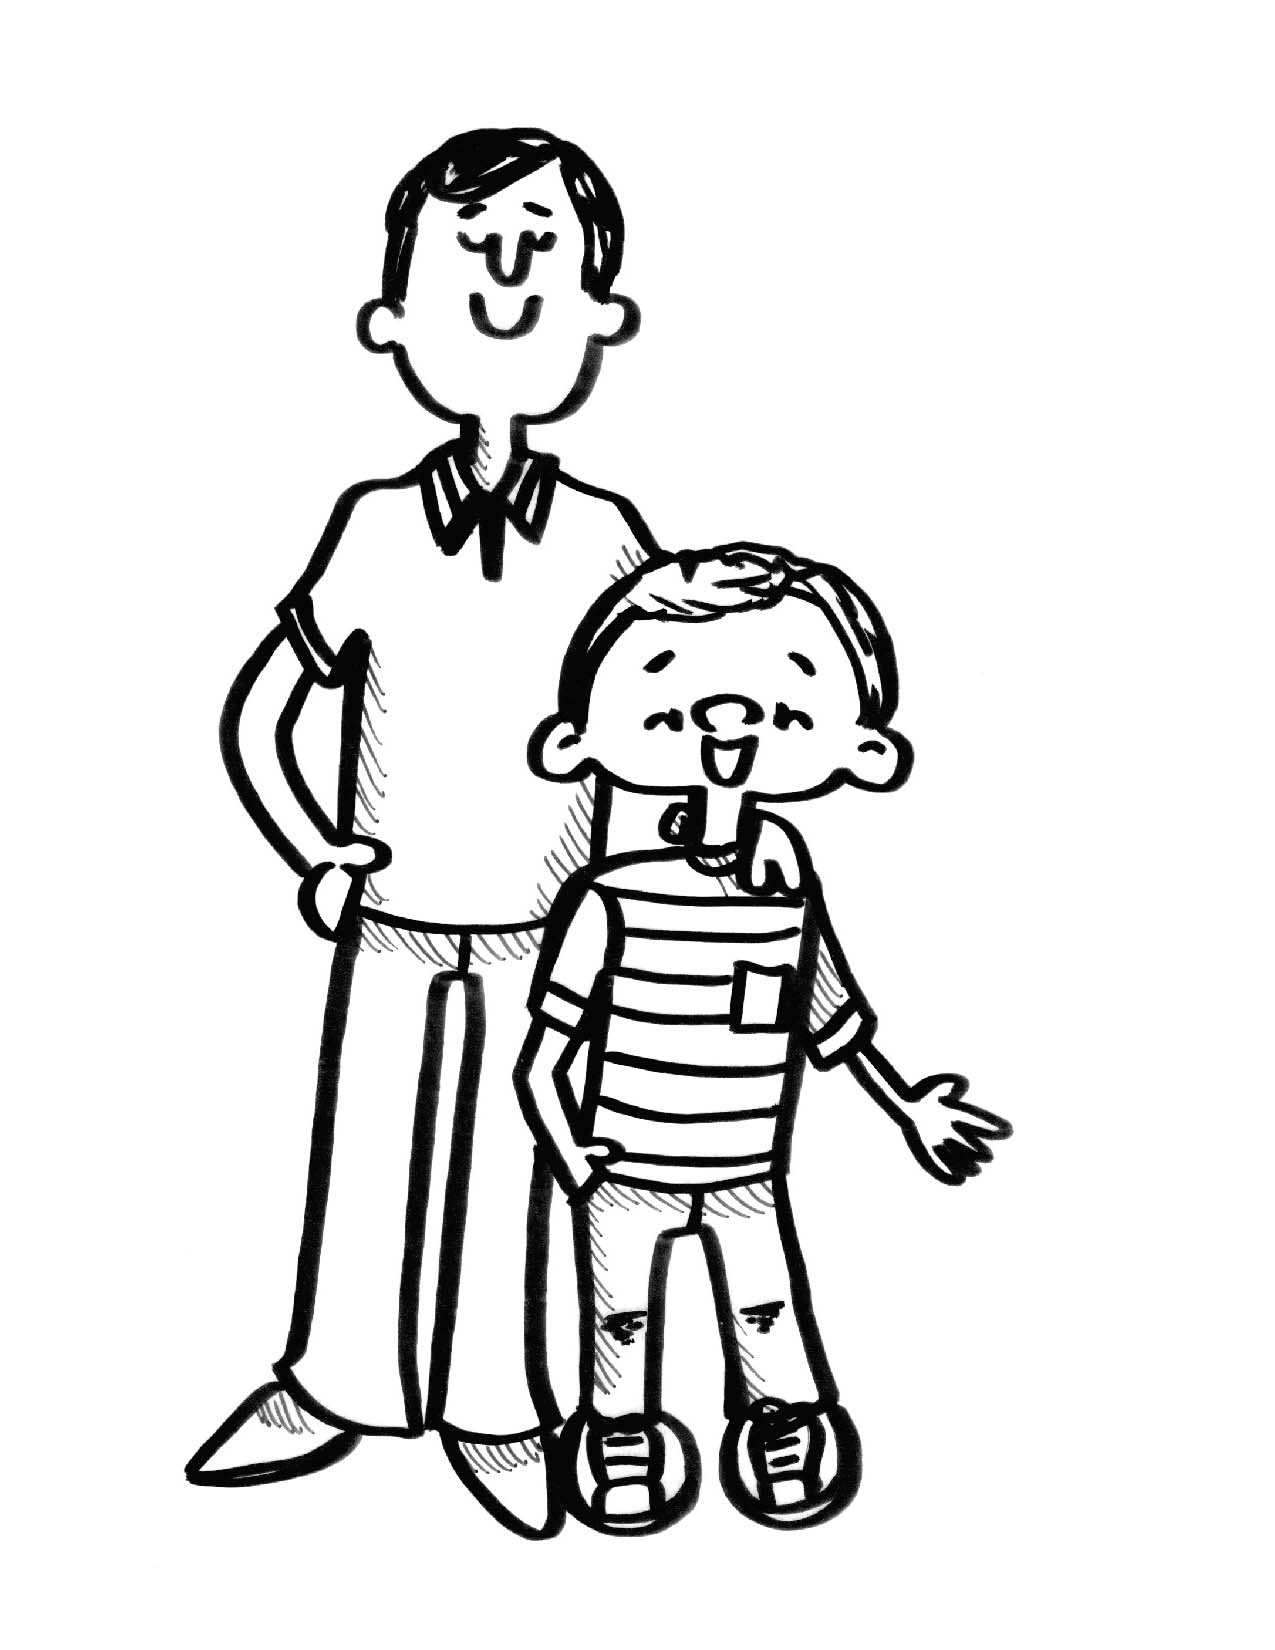 Coloring Sheet of a man and his son